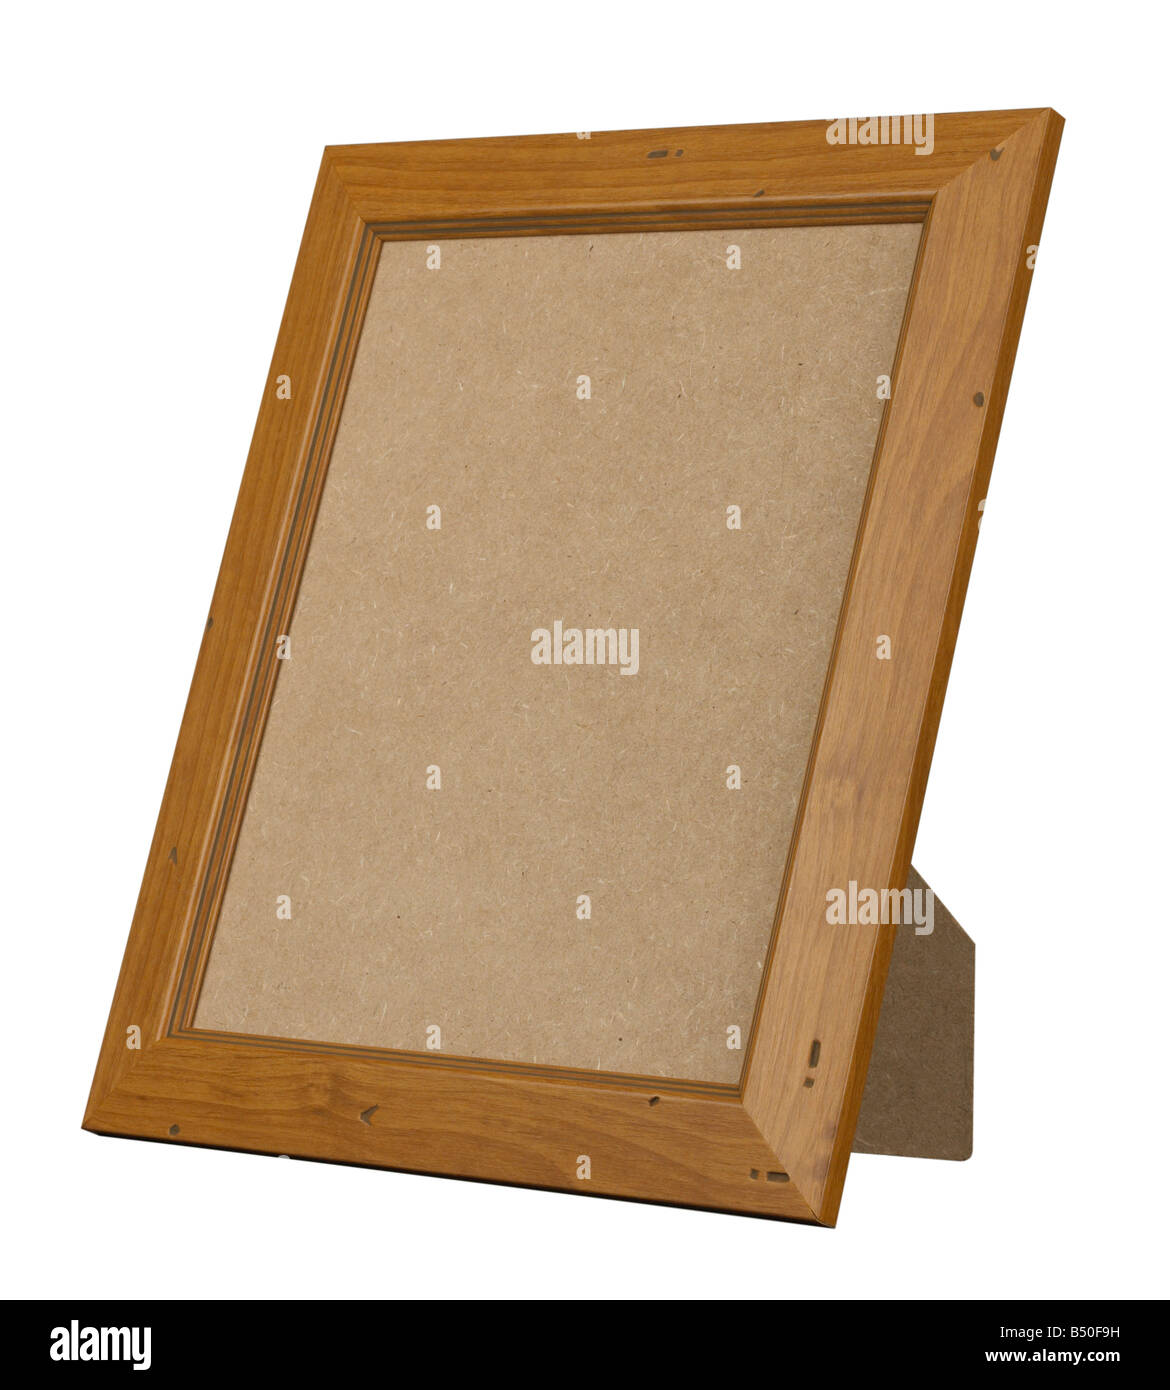 PICTURE FRAME WOOD STAND STANDING UPRIGHT Stock Photo